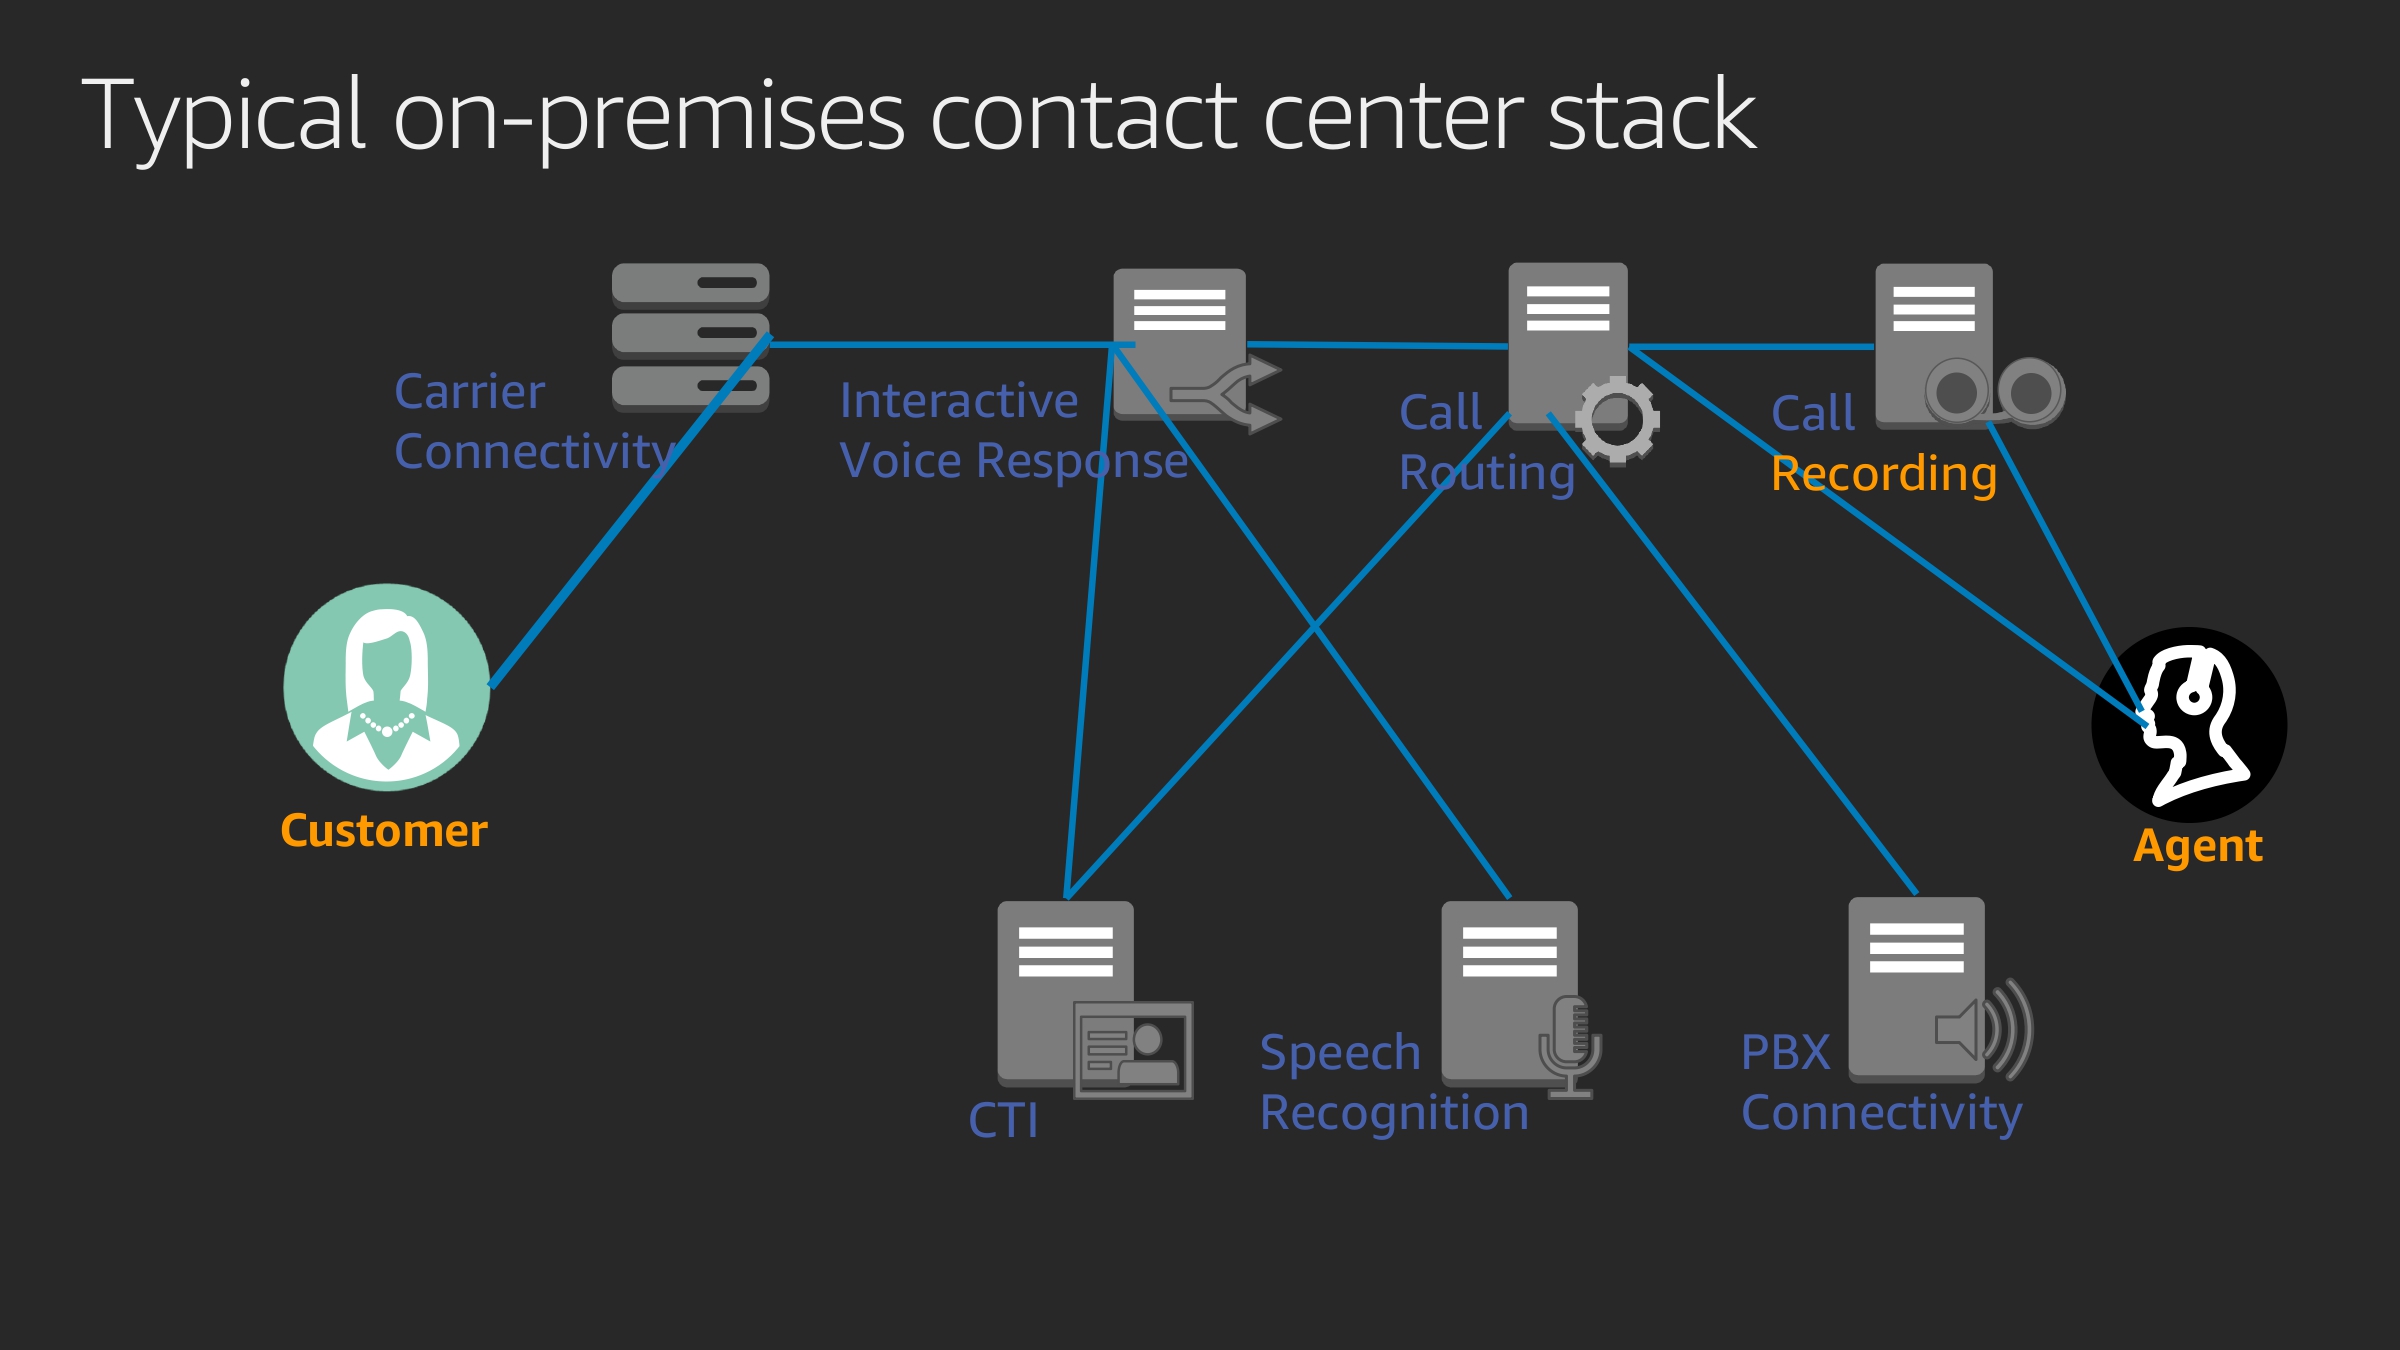 REPEAT 1 Build highly available contact centers with Amazon Connect EUC212-R1-6